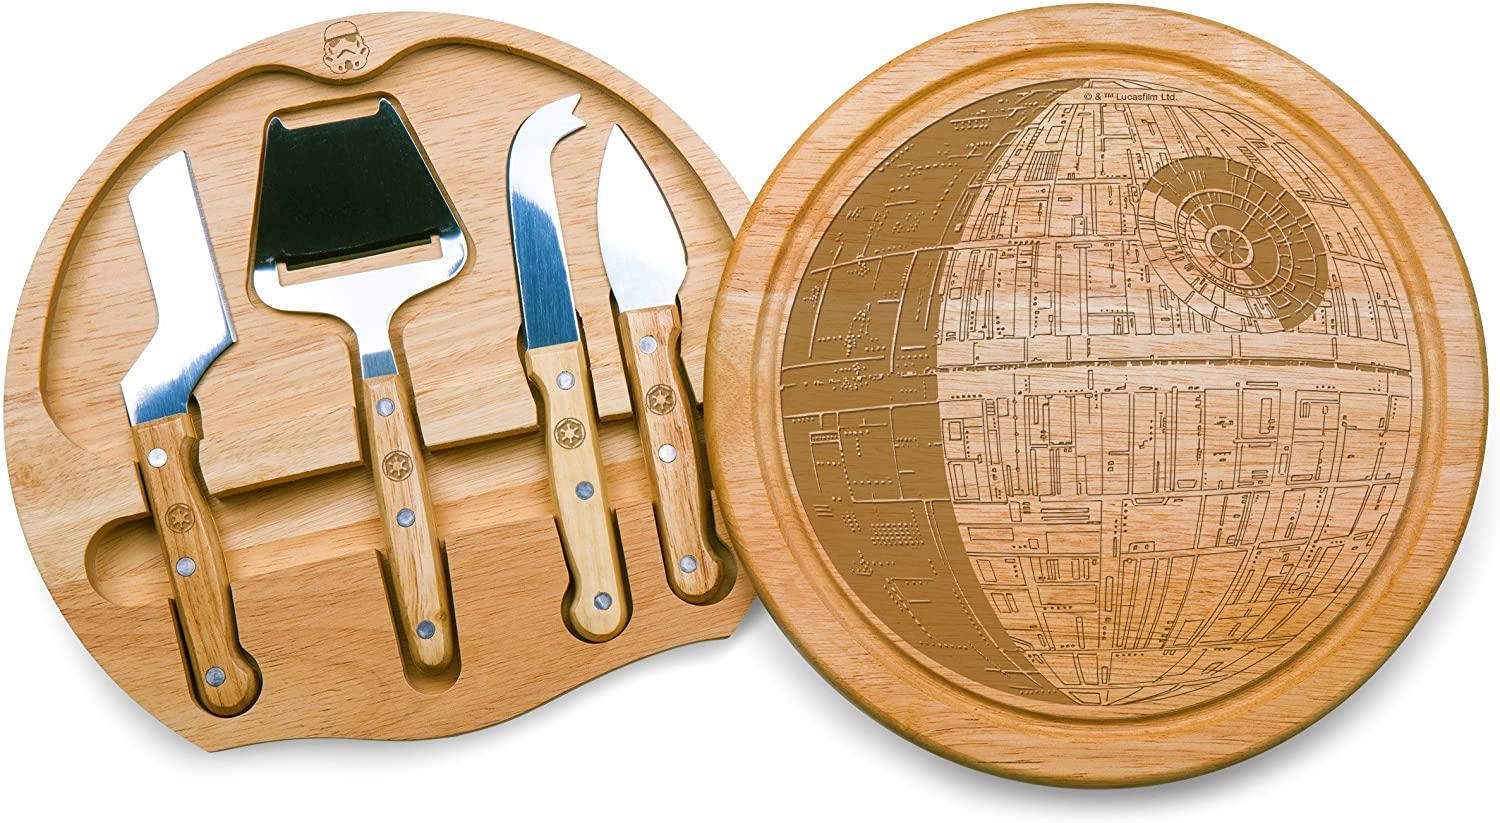 Lucas Star Wars/Death Star Circo Cheese Set with Cheese Tools for $25.99 Shipped